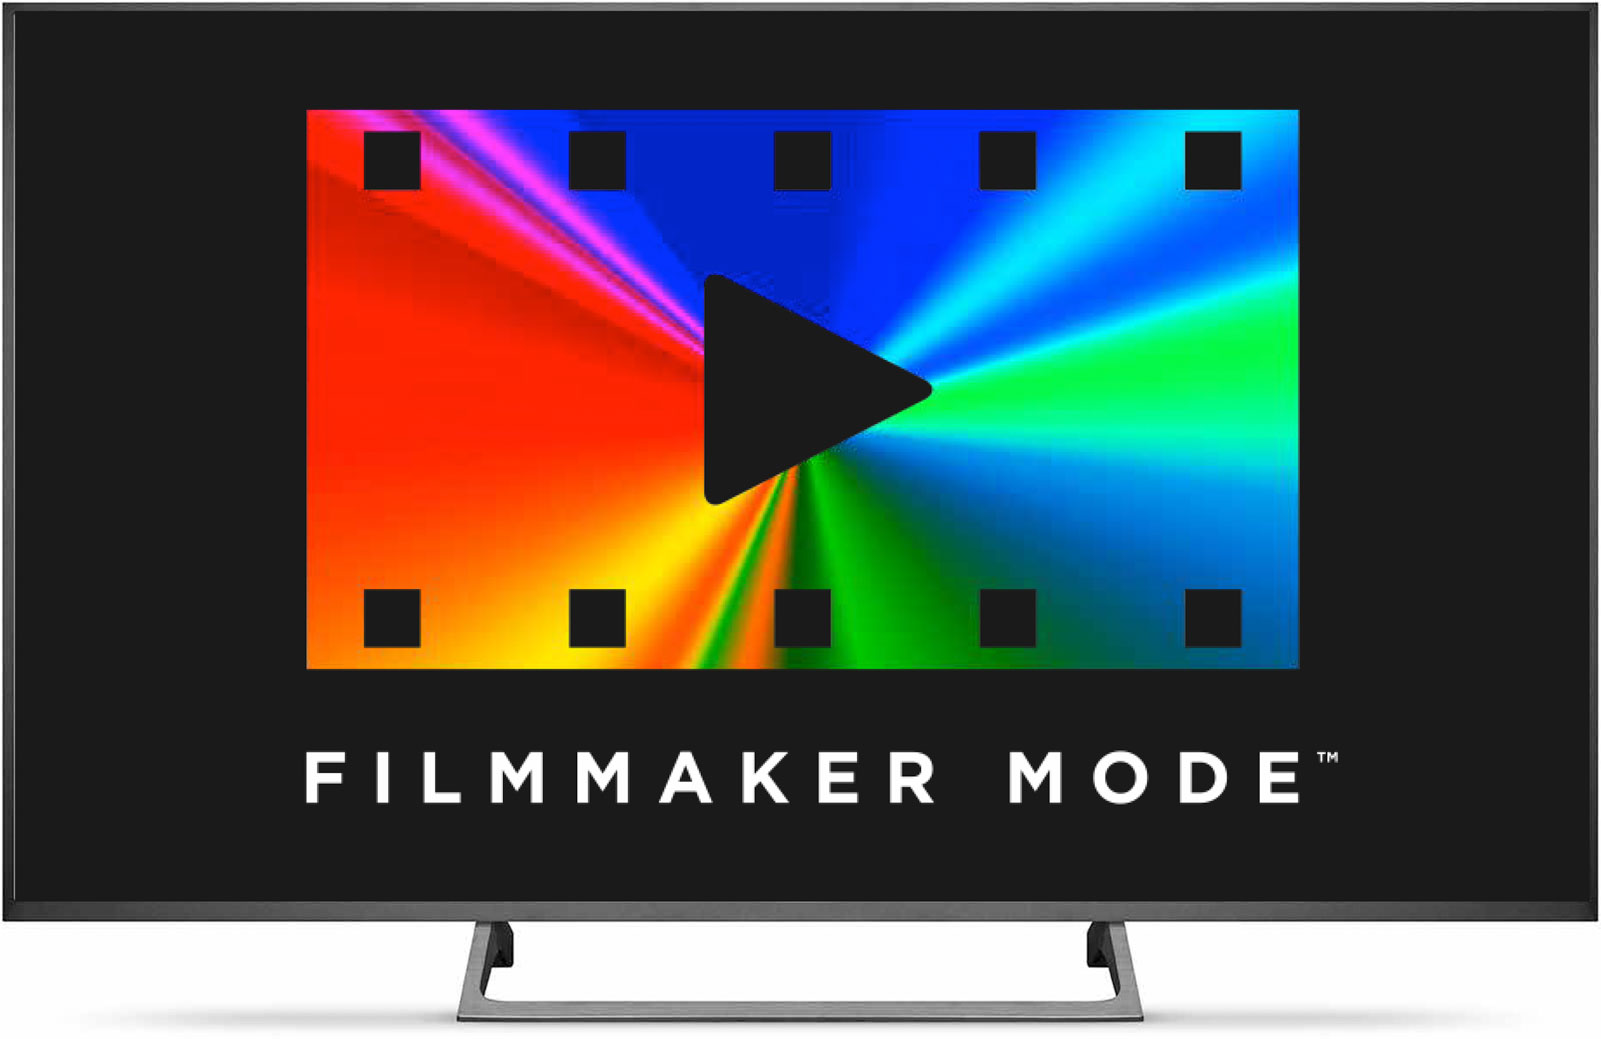 Filmmaker Mode in newer UHD TV sets/monitors guarantees matching cadence/framerate and more 4